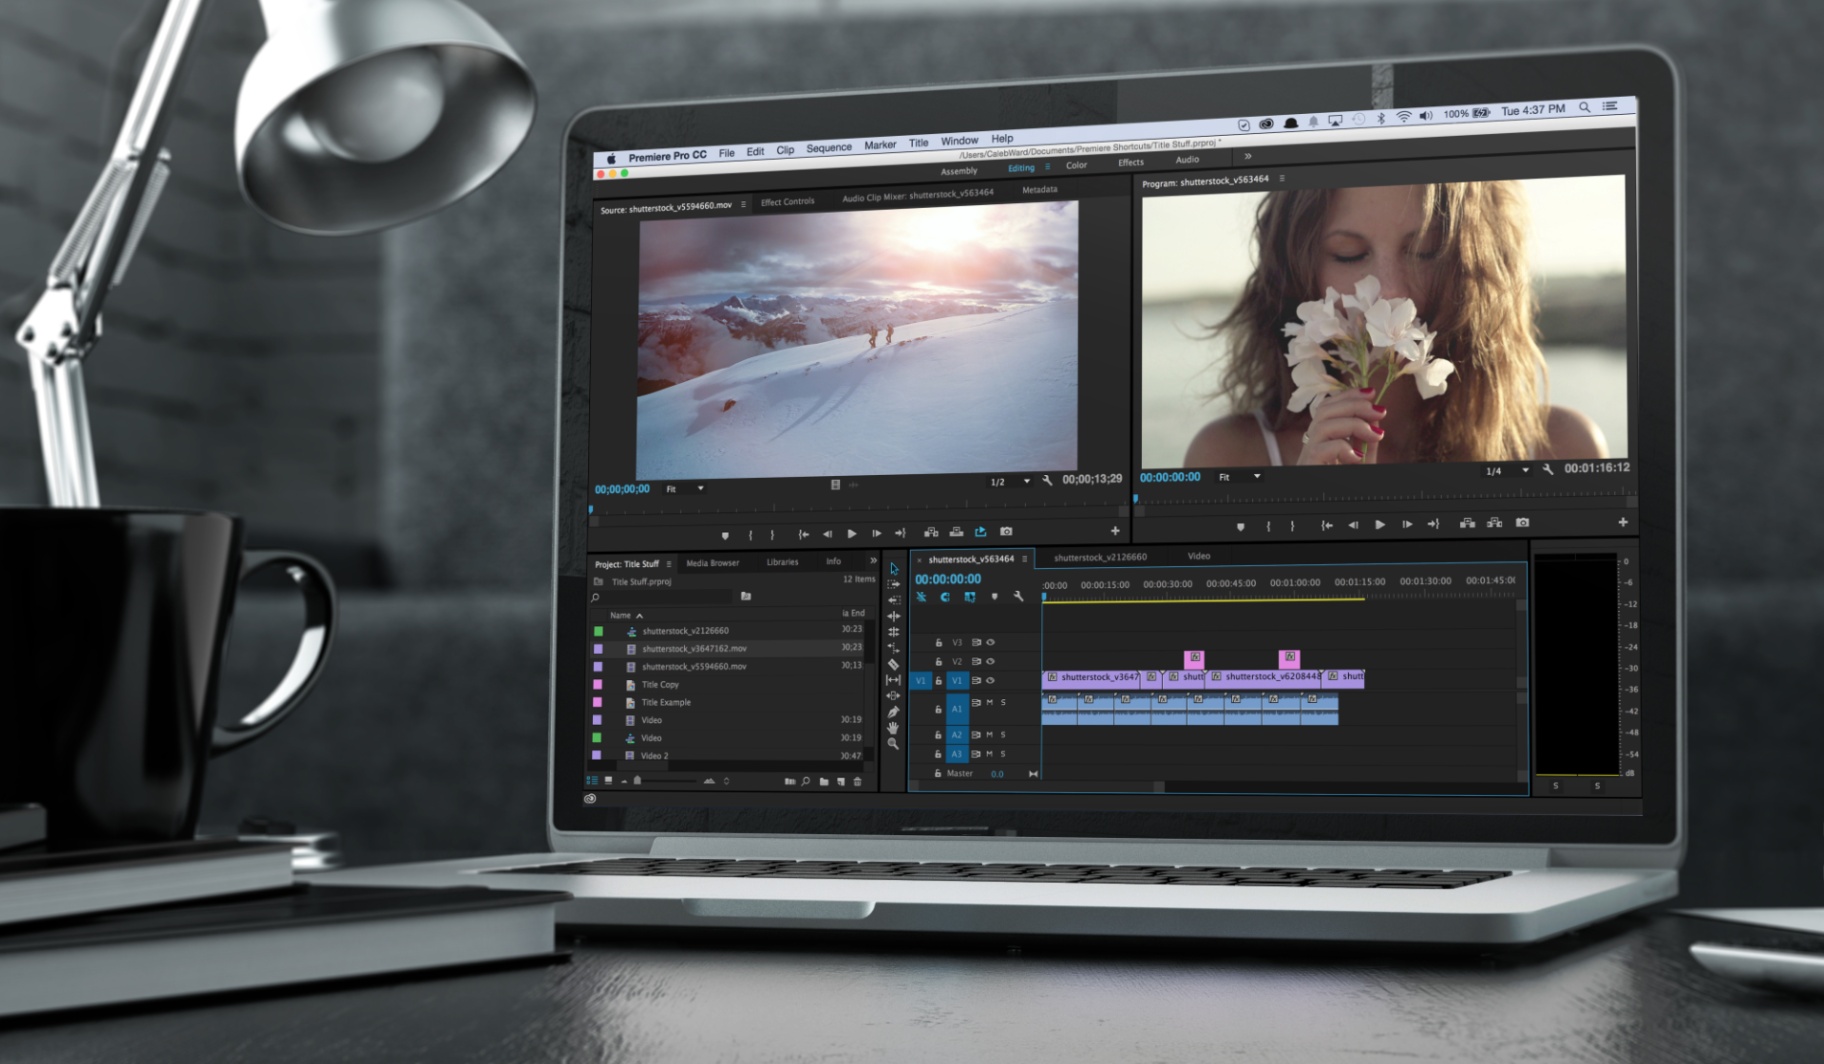 Video Editing - How to Find Available Jobs